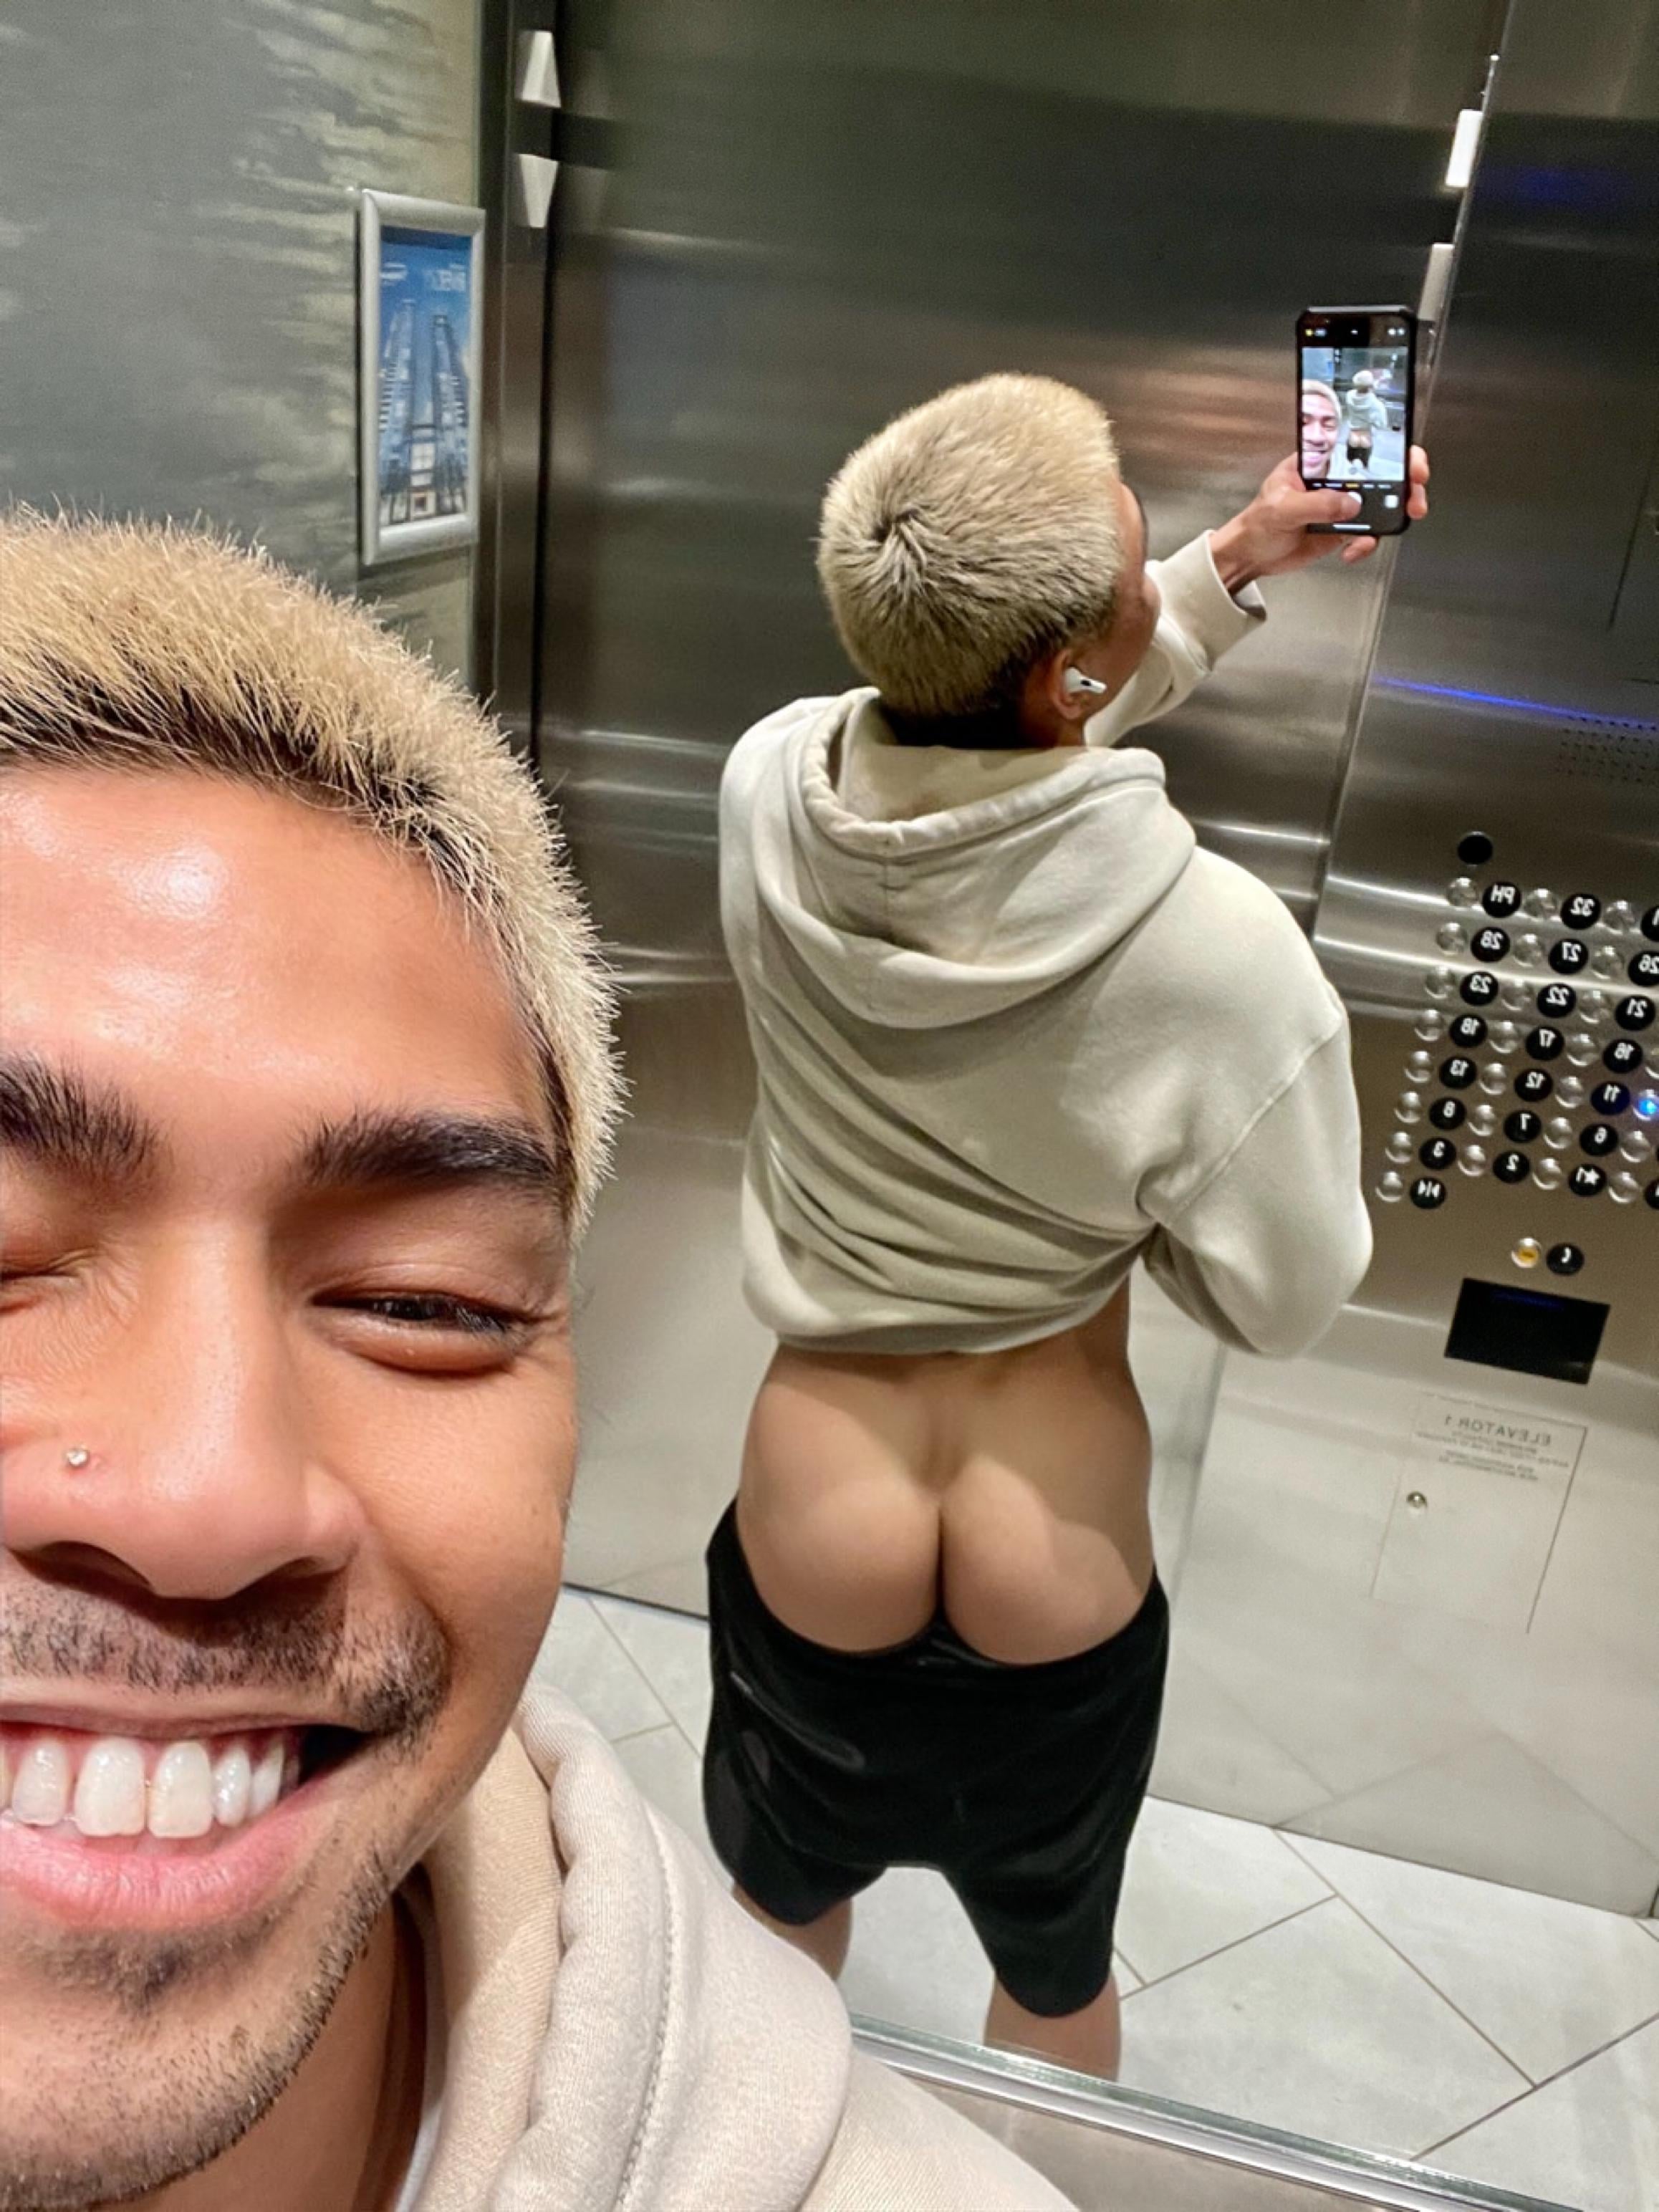 Just me and my fluffy ass in the elevator